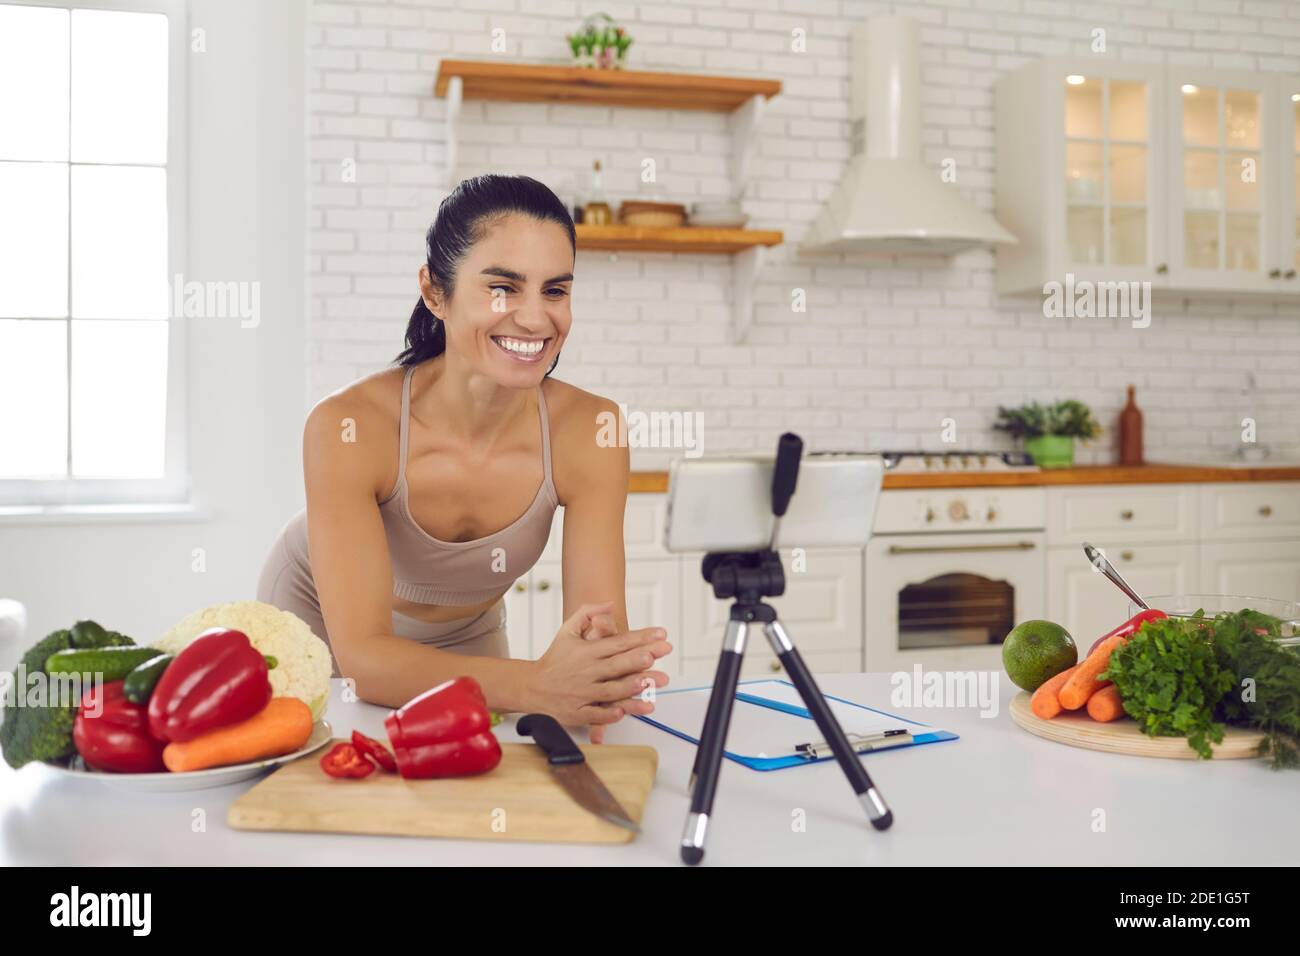 Smiling fitness vlogger recording video on vegetarian diet and healthy eating habits Stock Photo